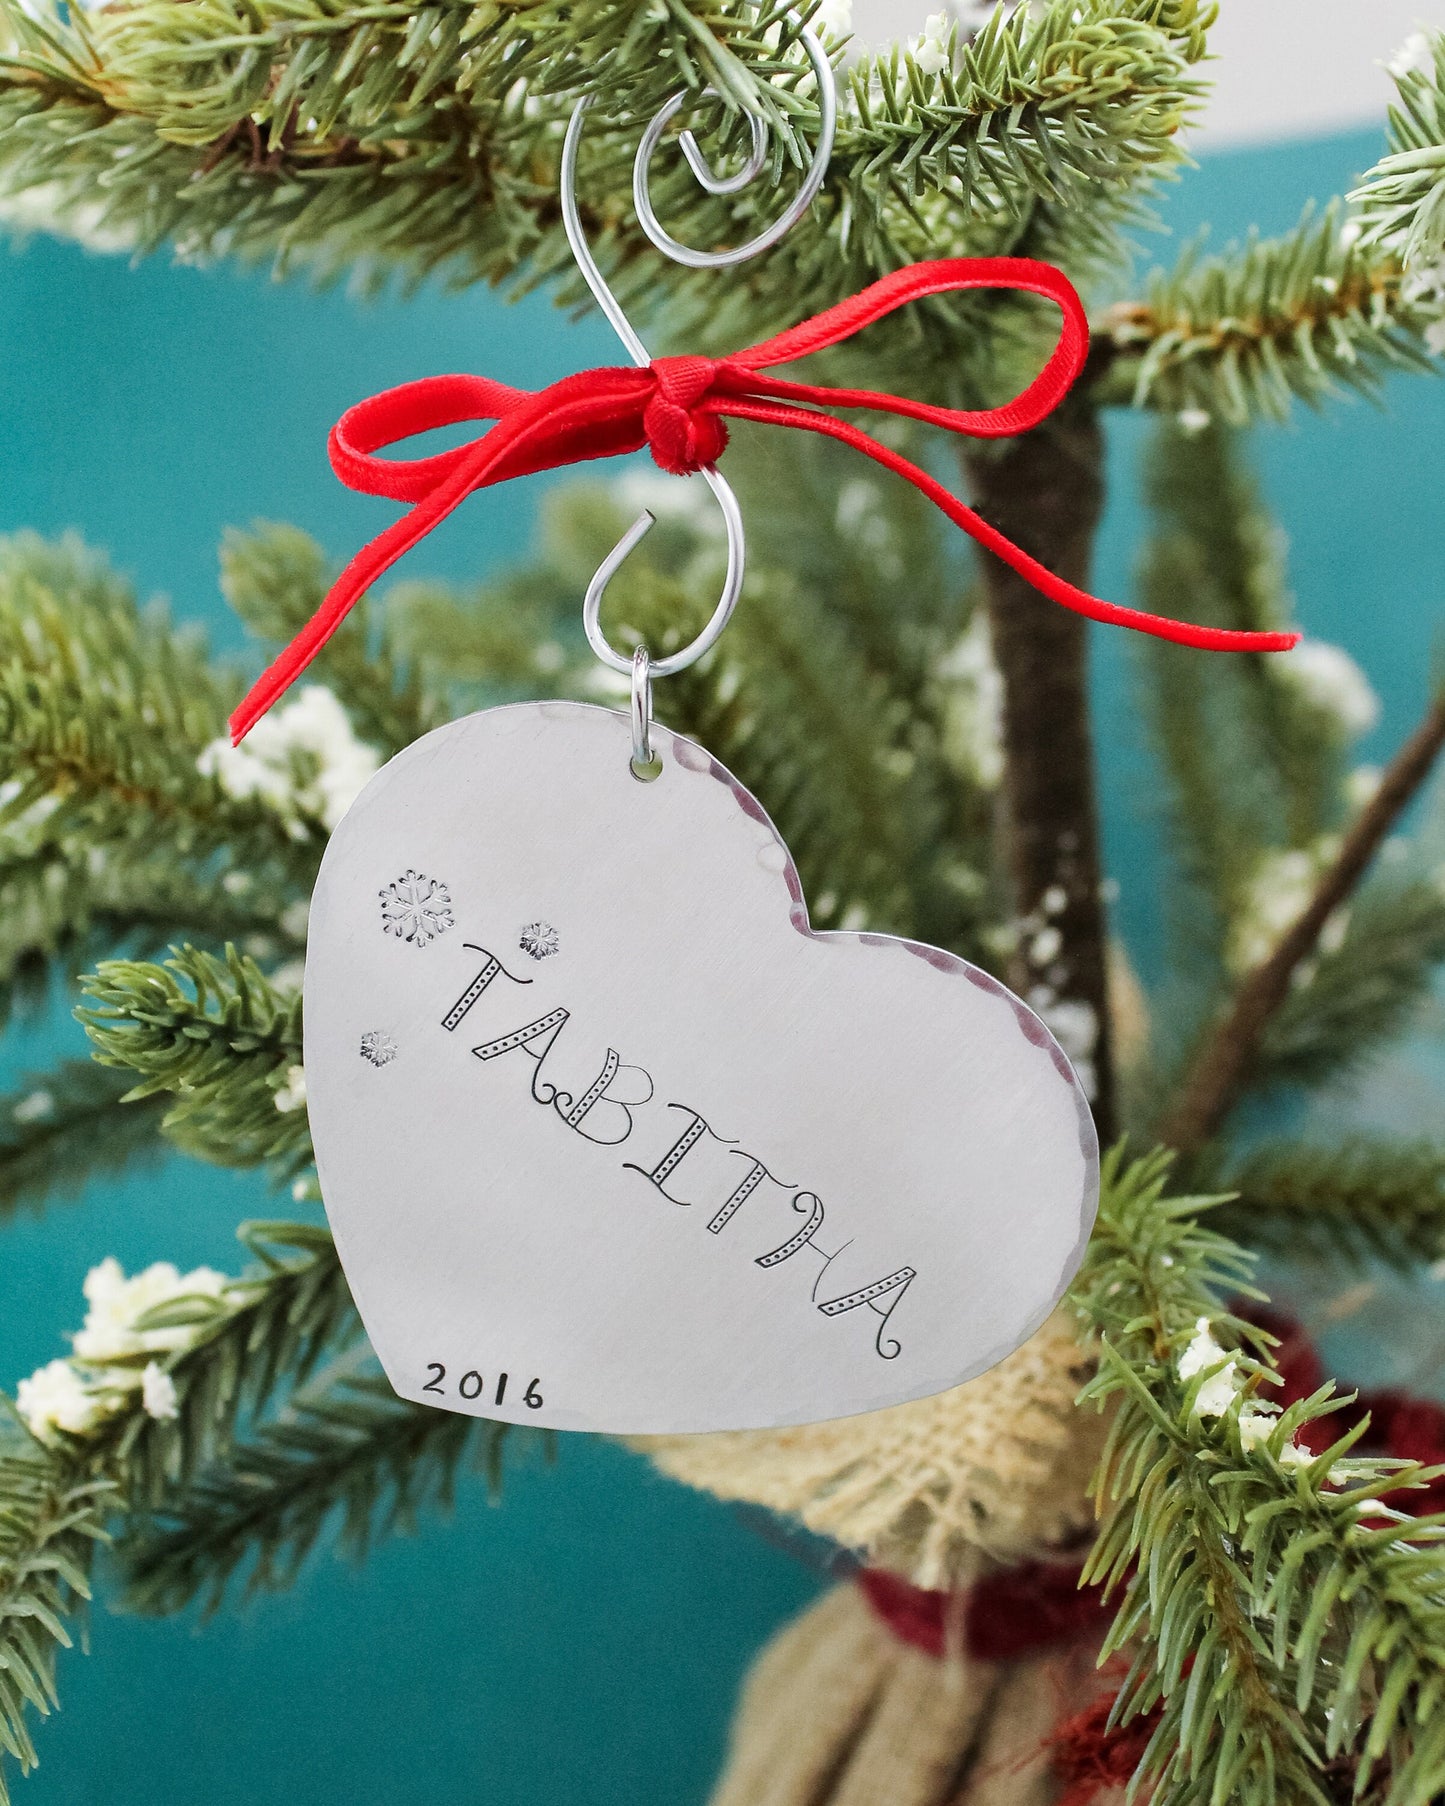 Personalized Heart Ornament, Children's Ornament, Custom Name Ornament, Heart Christmas Ornament, Hand Stamped, Gifts under 20